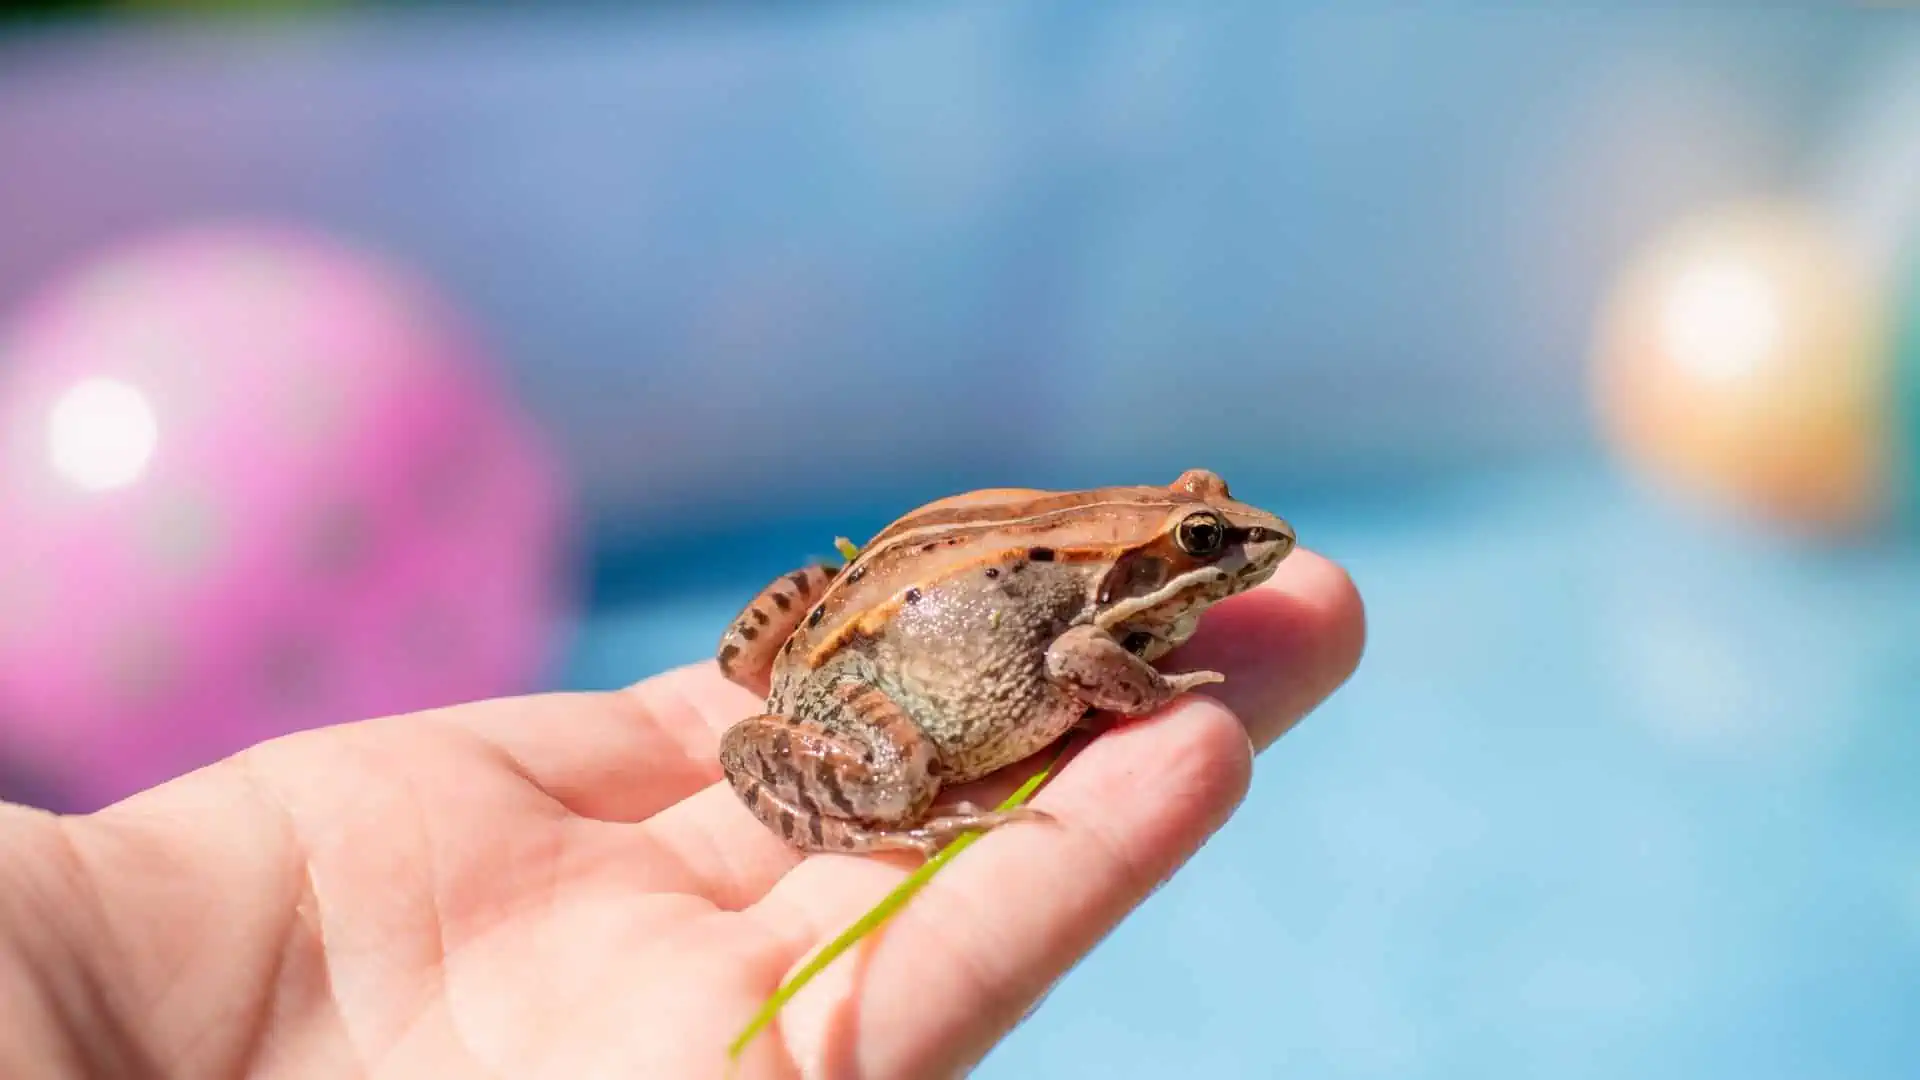 How to Keep Frogs out Of Pool?